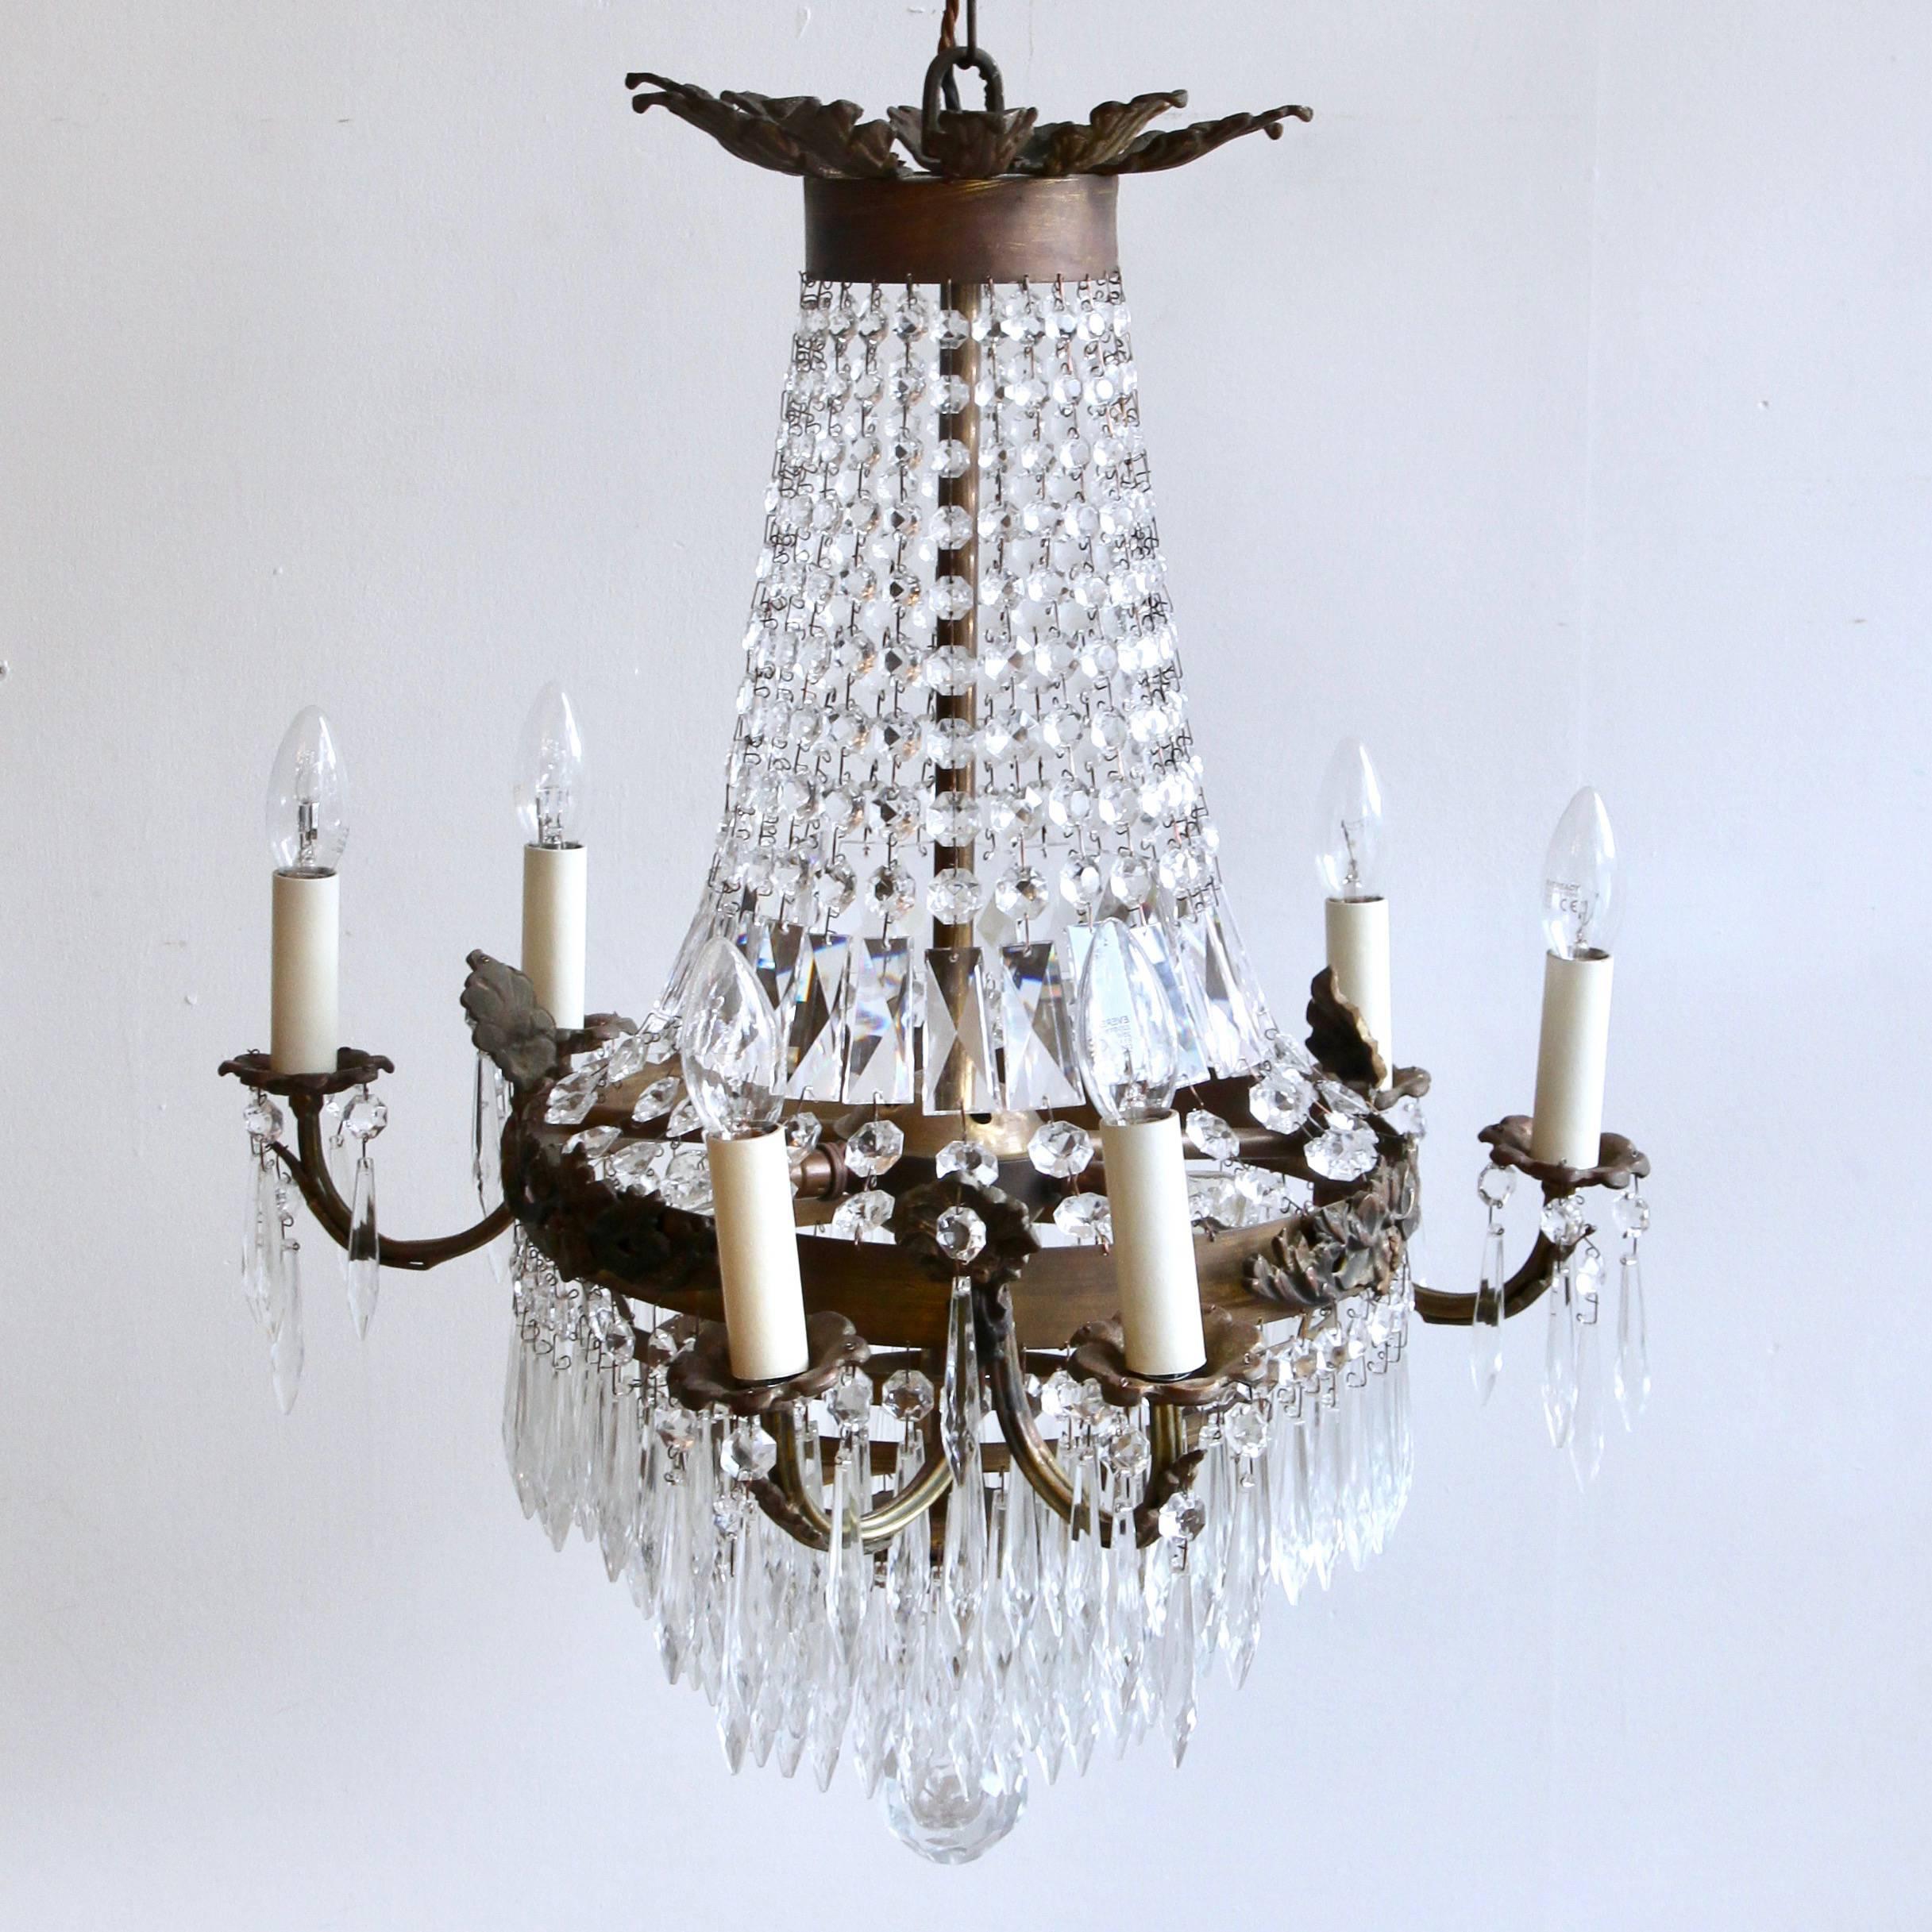 This French tiered and branch chandelier is a fine gilt early 20th century chandelier. The brass frame has formed a beautiful patina, shown especially in the moulded brass sconces on the outer top layer and the top crown brass leaf details. The